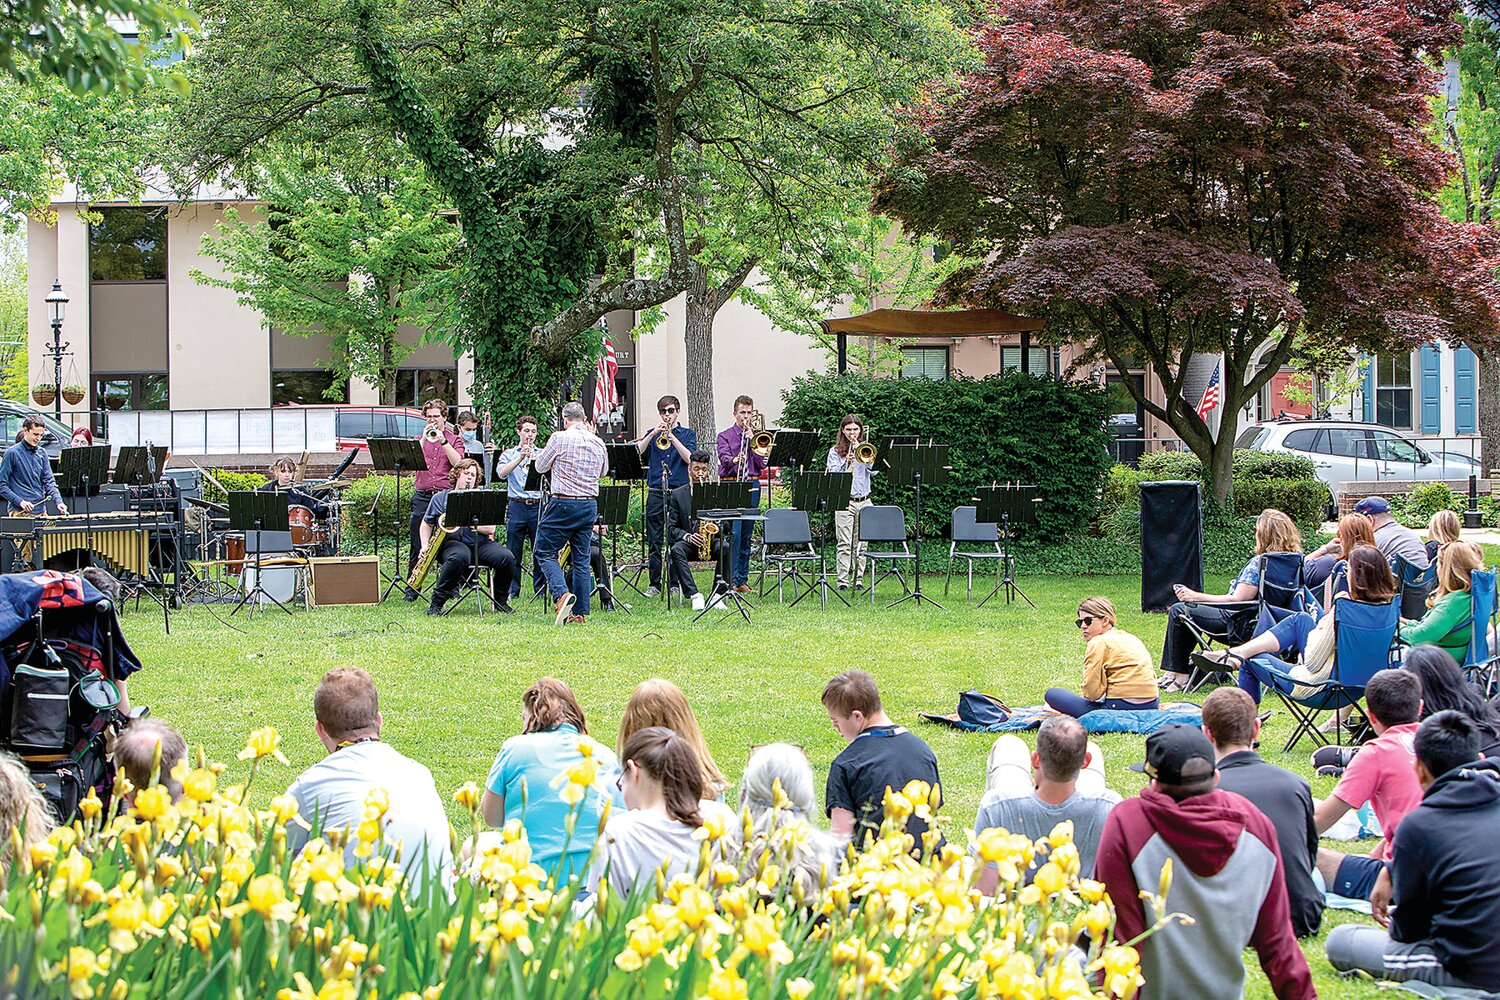 Brown Bag-It with the Arts continues May 31, with Delaware Valley Saxophone Quartet. Weekly concerts continue on the lawn of the old Bucks County courthouse in Doylestown, Wednesdays at noon, weather permitting, through Sept. 6.